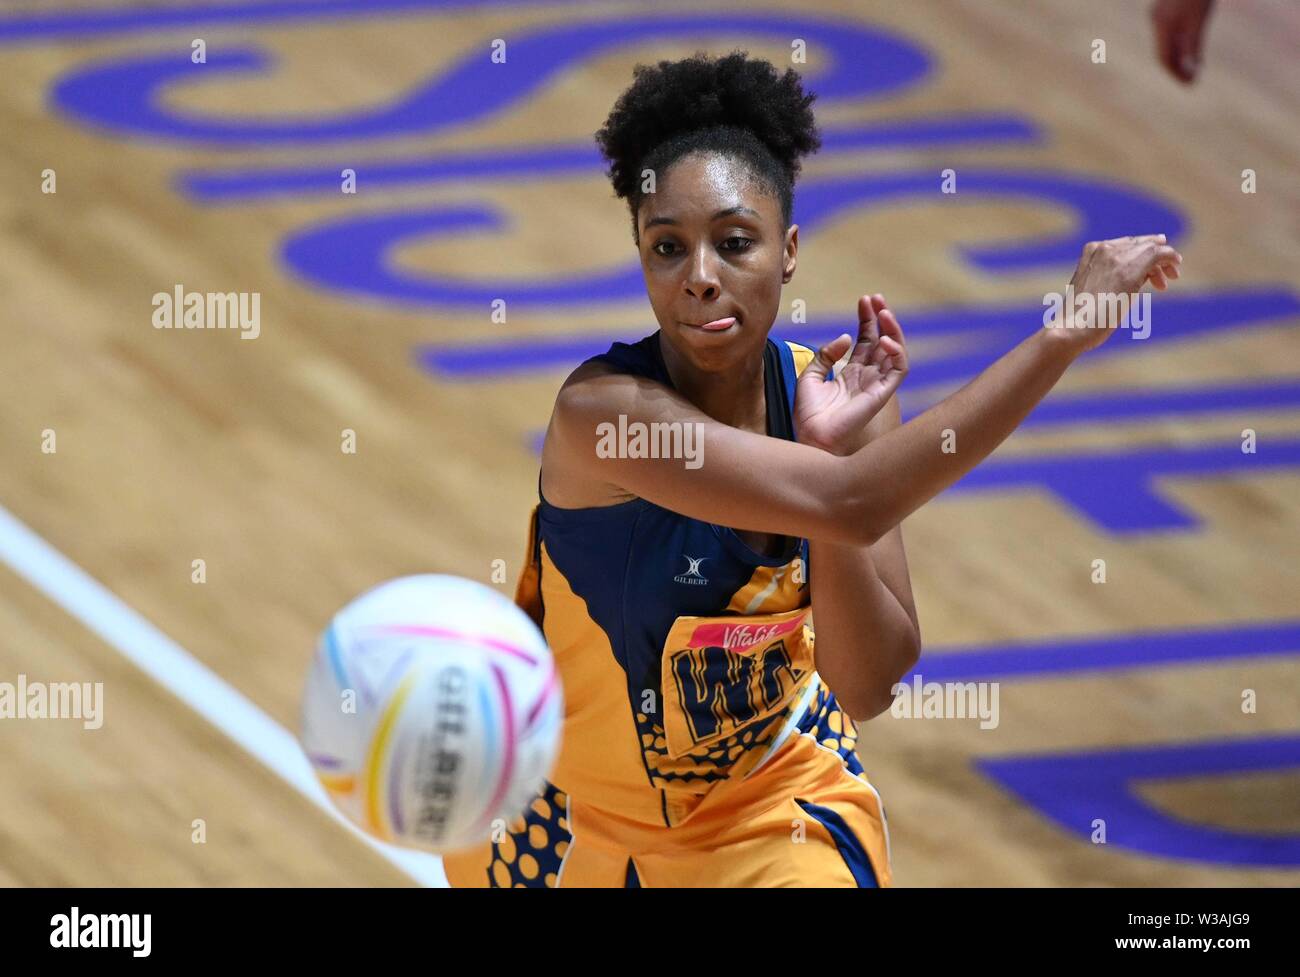 Liverpool, UK. 14 July 2019. Damisha Croney (Barbados) during the Preliminary game between Malawi and Barbados at the Netball World Cup. M and S arena, Liverpool. Merseyside. UK. Credit Garry Bowdenh/SIP photo agency/Alamy live news. Stock Photo